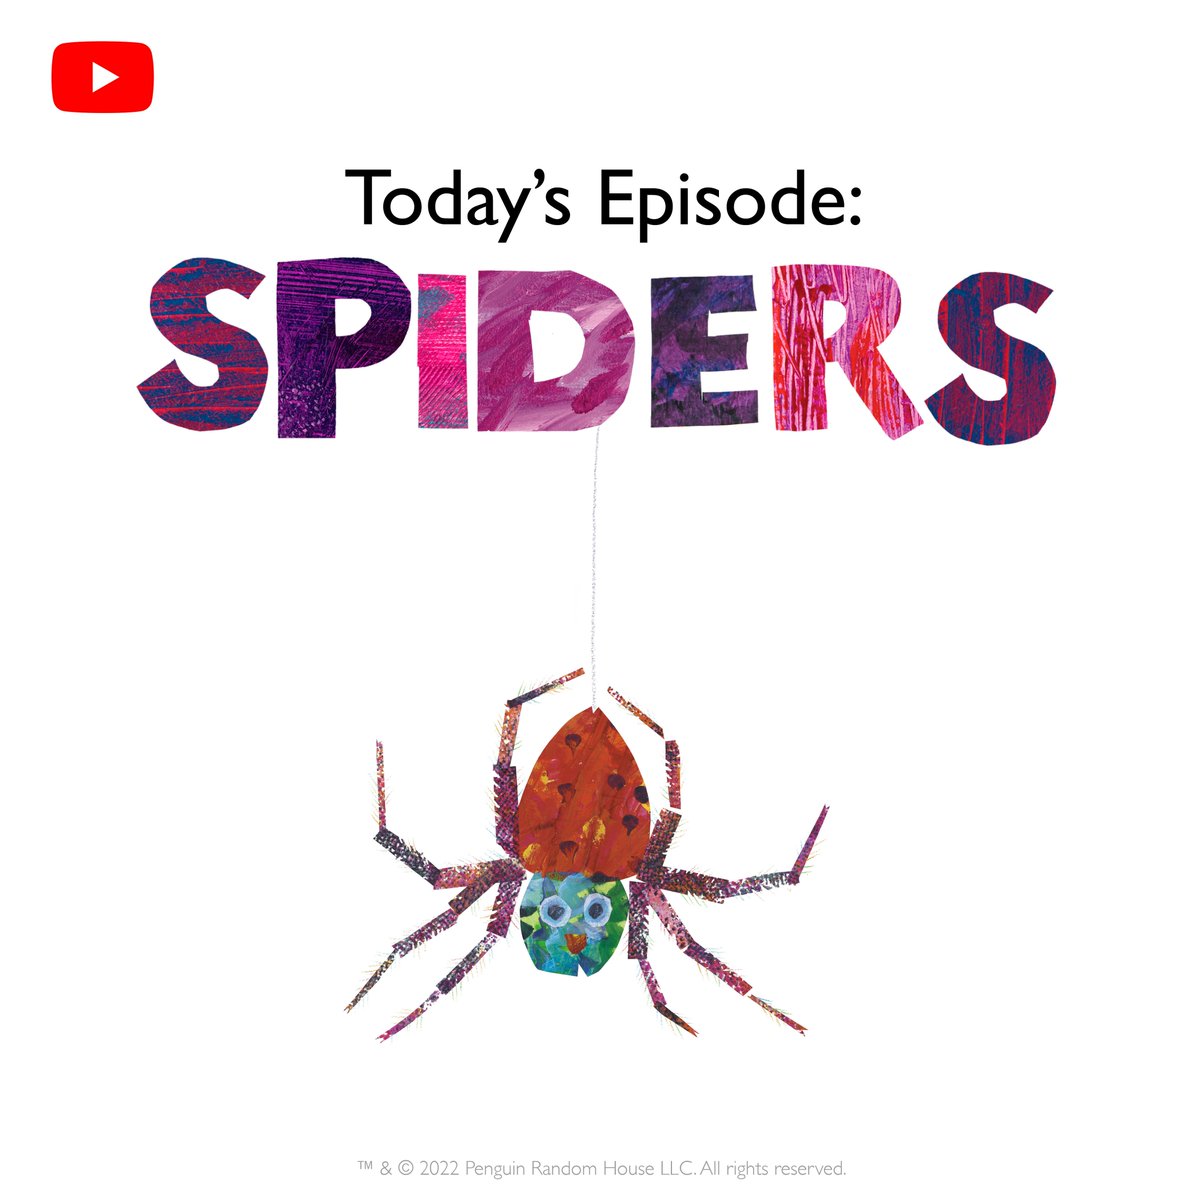 Today is the official launch of The World of Eric Carle YouTube channel! We are thrilled to share our very first episode theme—SPIDERS! Today’s episode will feature a full storytime read aloud of The Very Busy Spider. Watch the episode here: youtu.be/qHl3s4ctsIQ